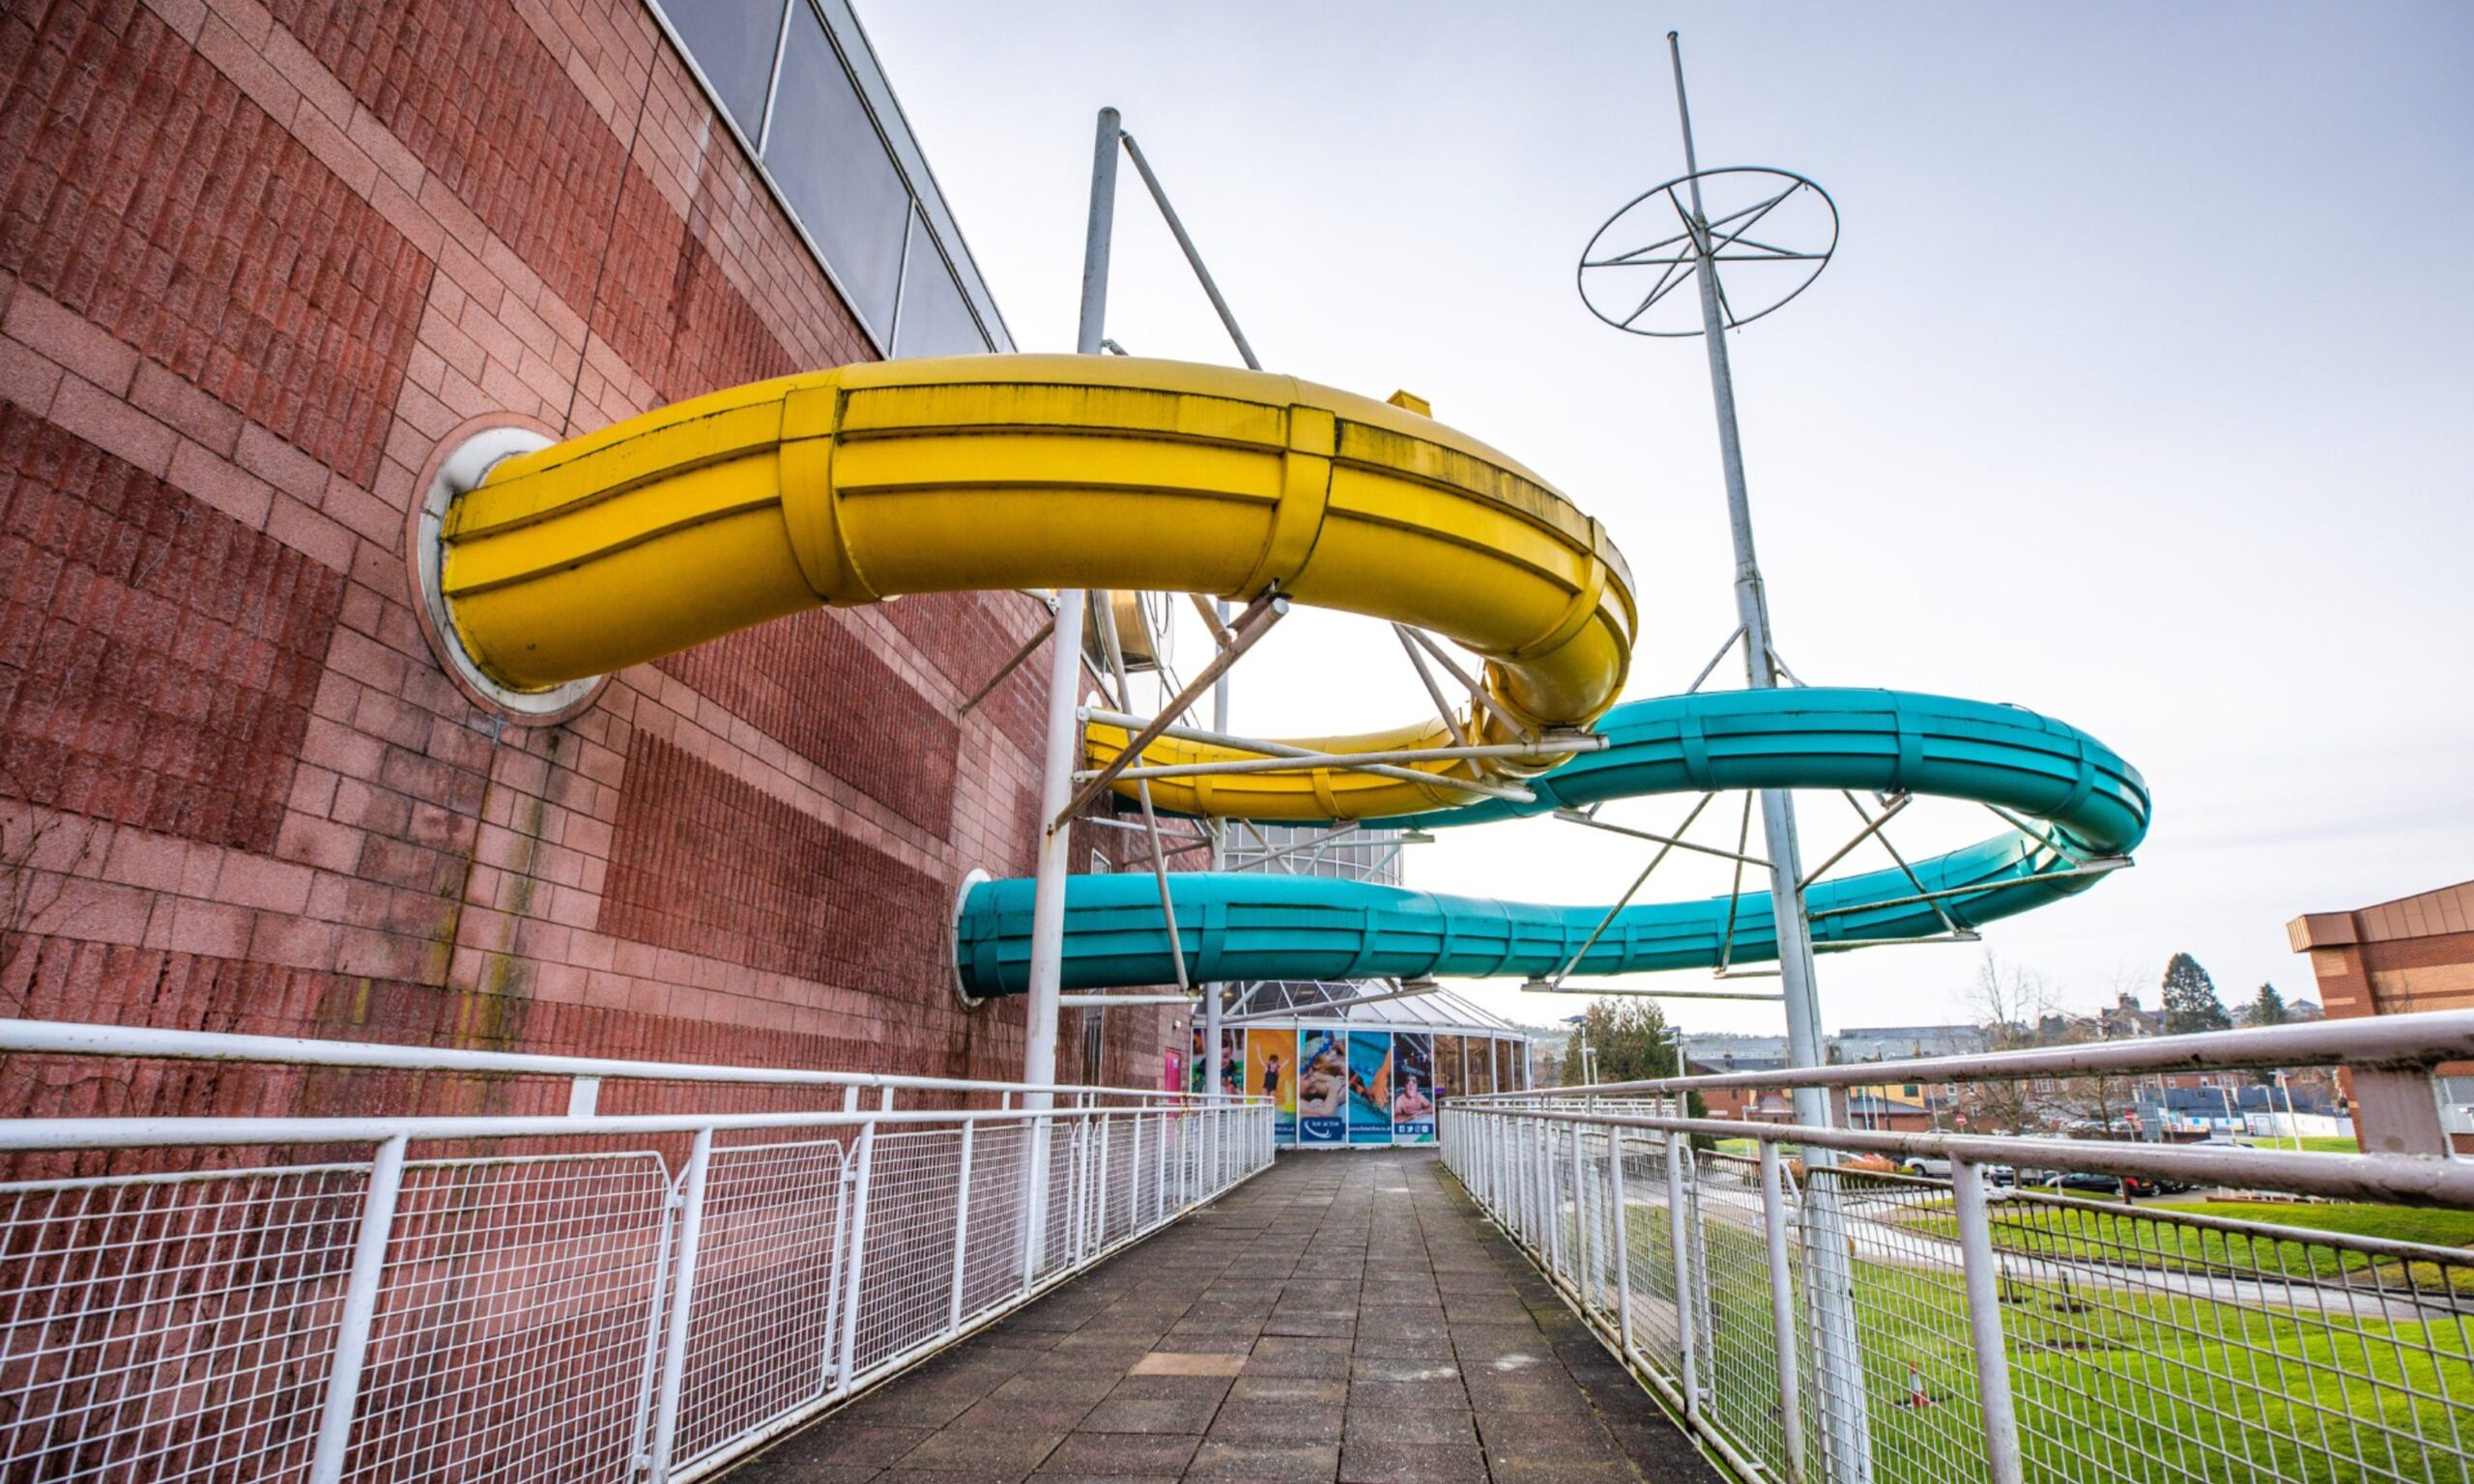 Perth Leisure Pool exterior with flumes.